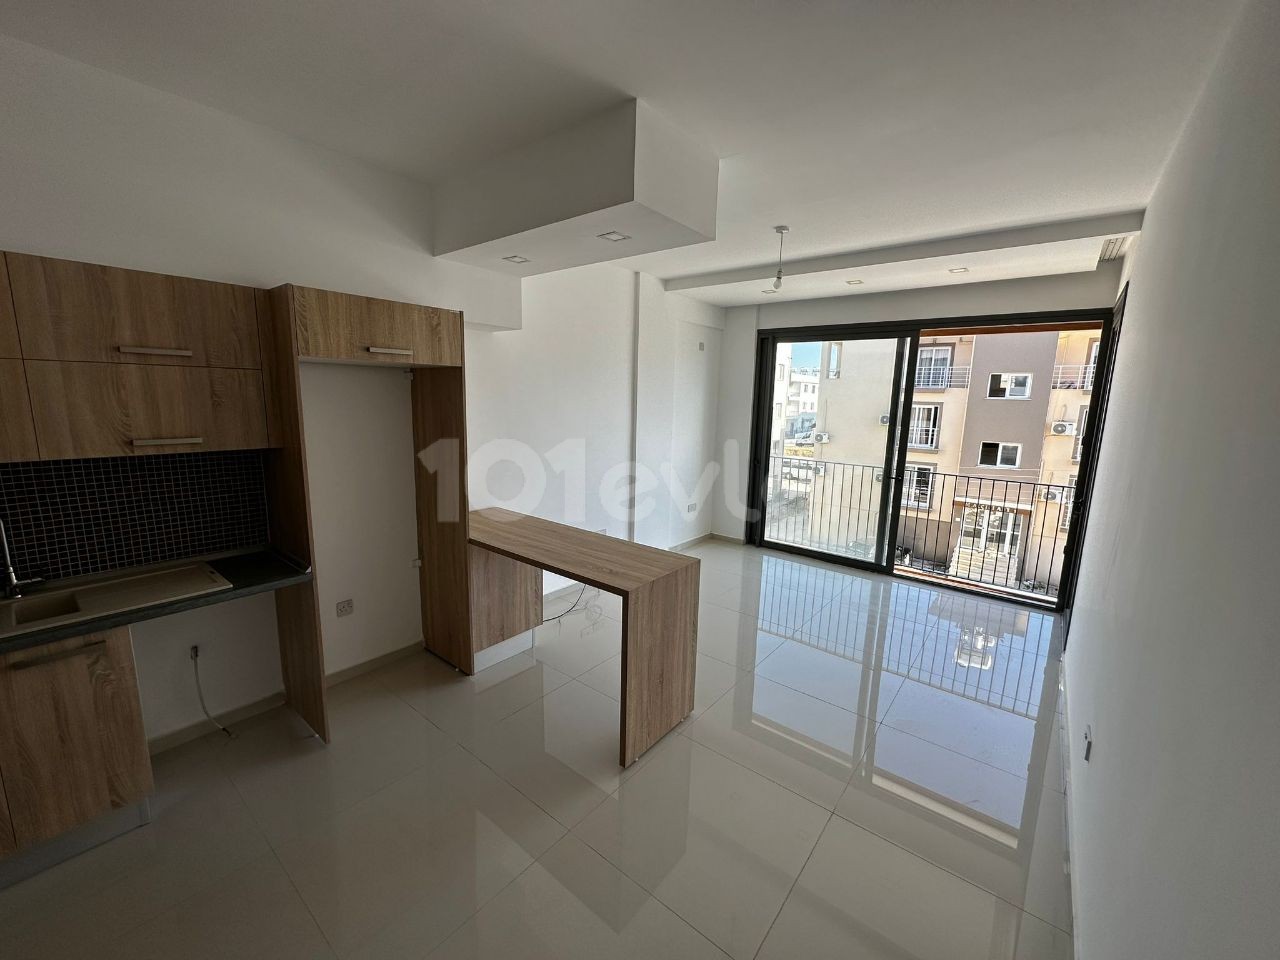 2+1 flats for sale in Nicosia, Hamitköy CityPark site!